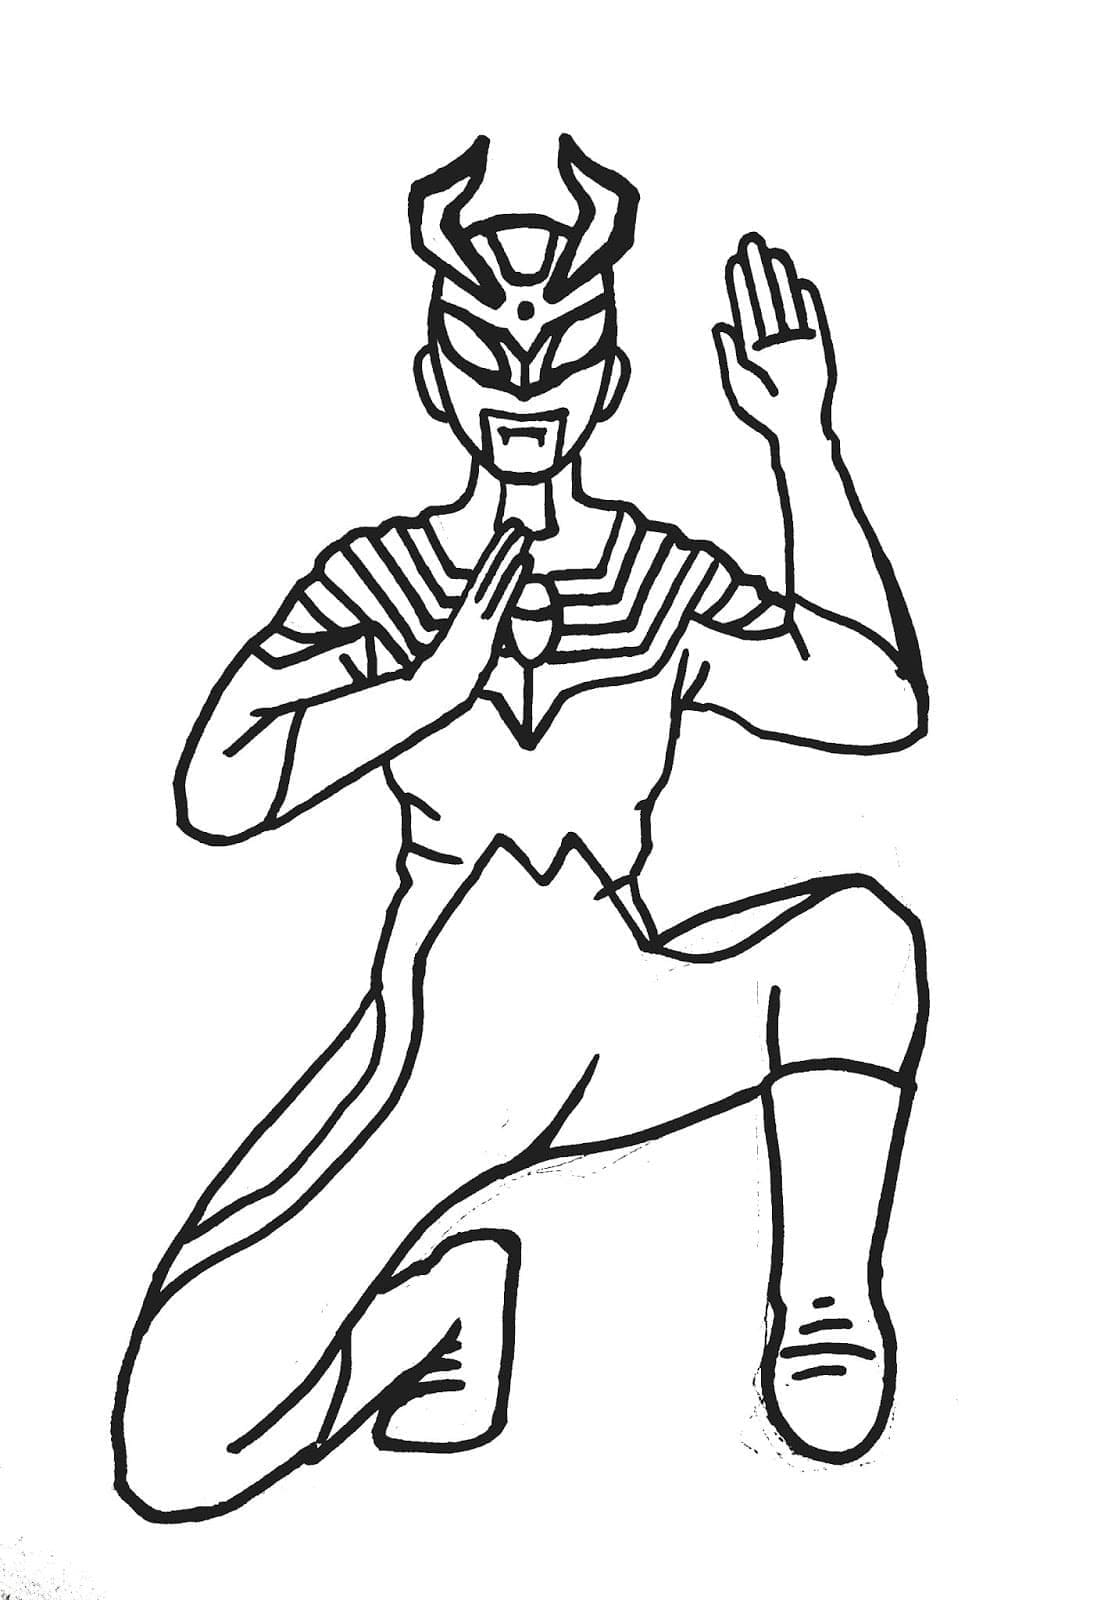 Ultraman 13 coloring page